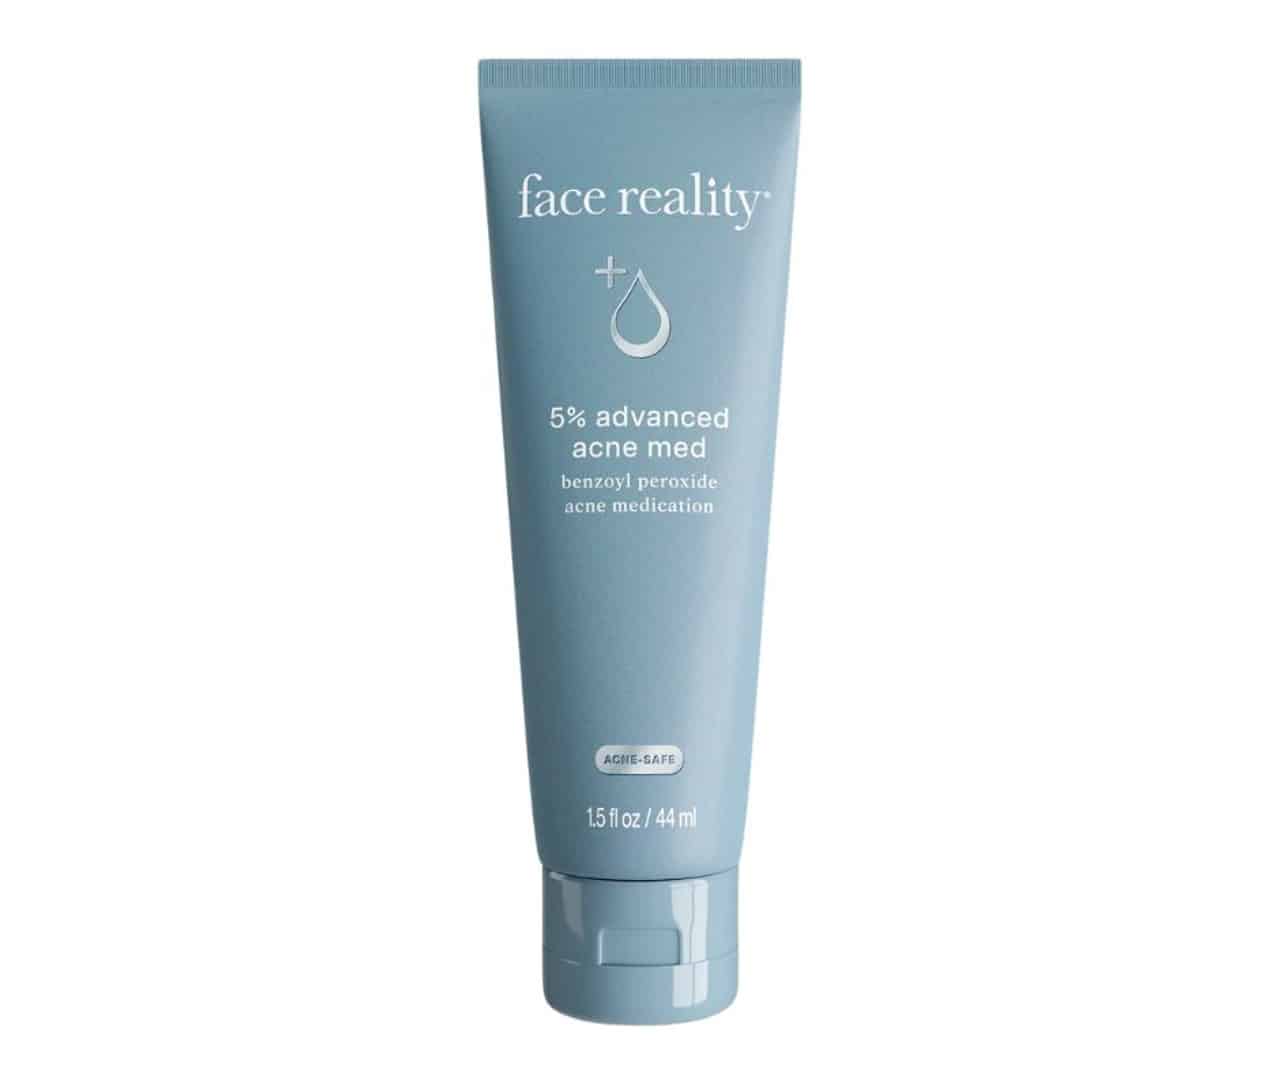 Acne-safe, Face Reality topical benzyl peroxide helps blemishes